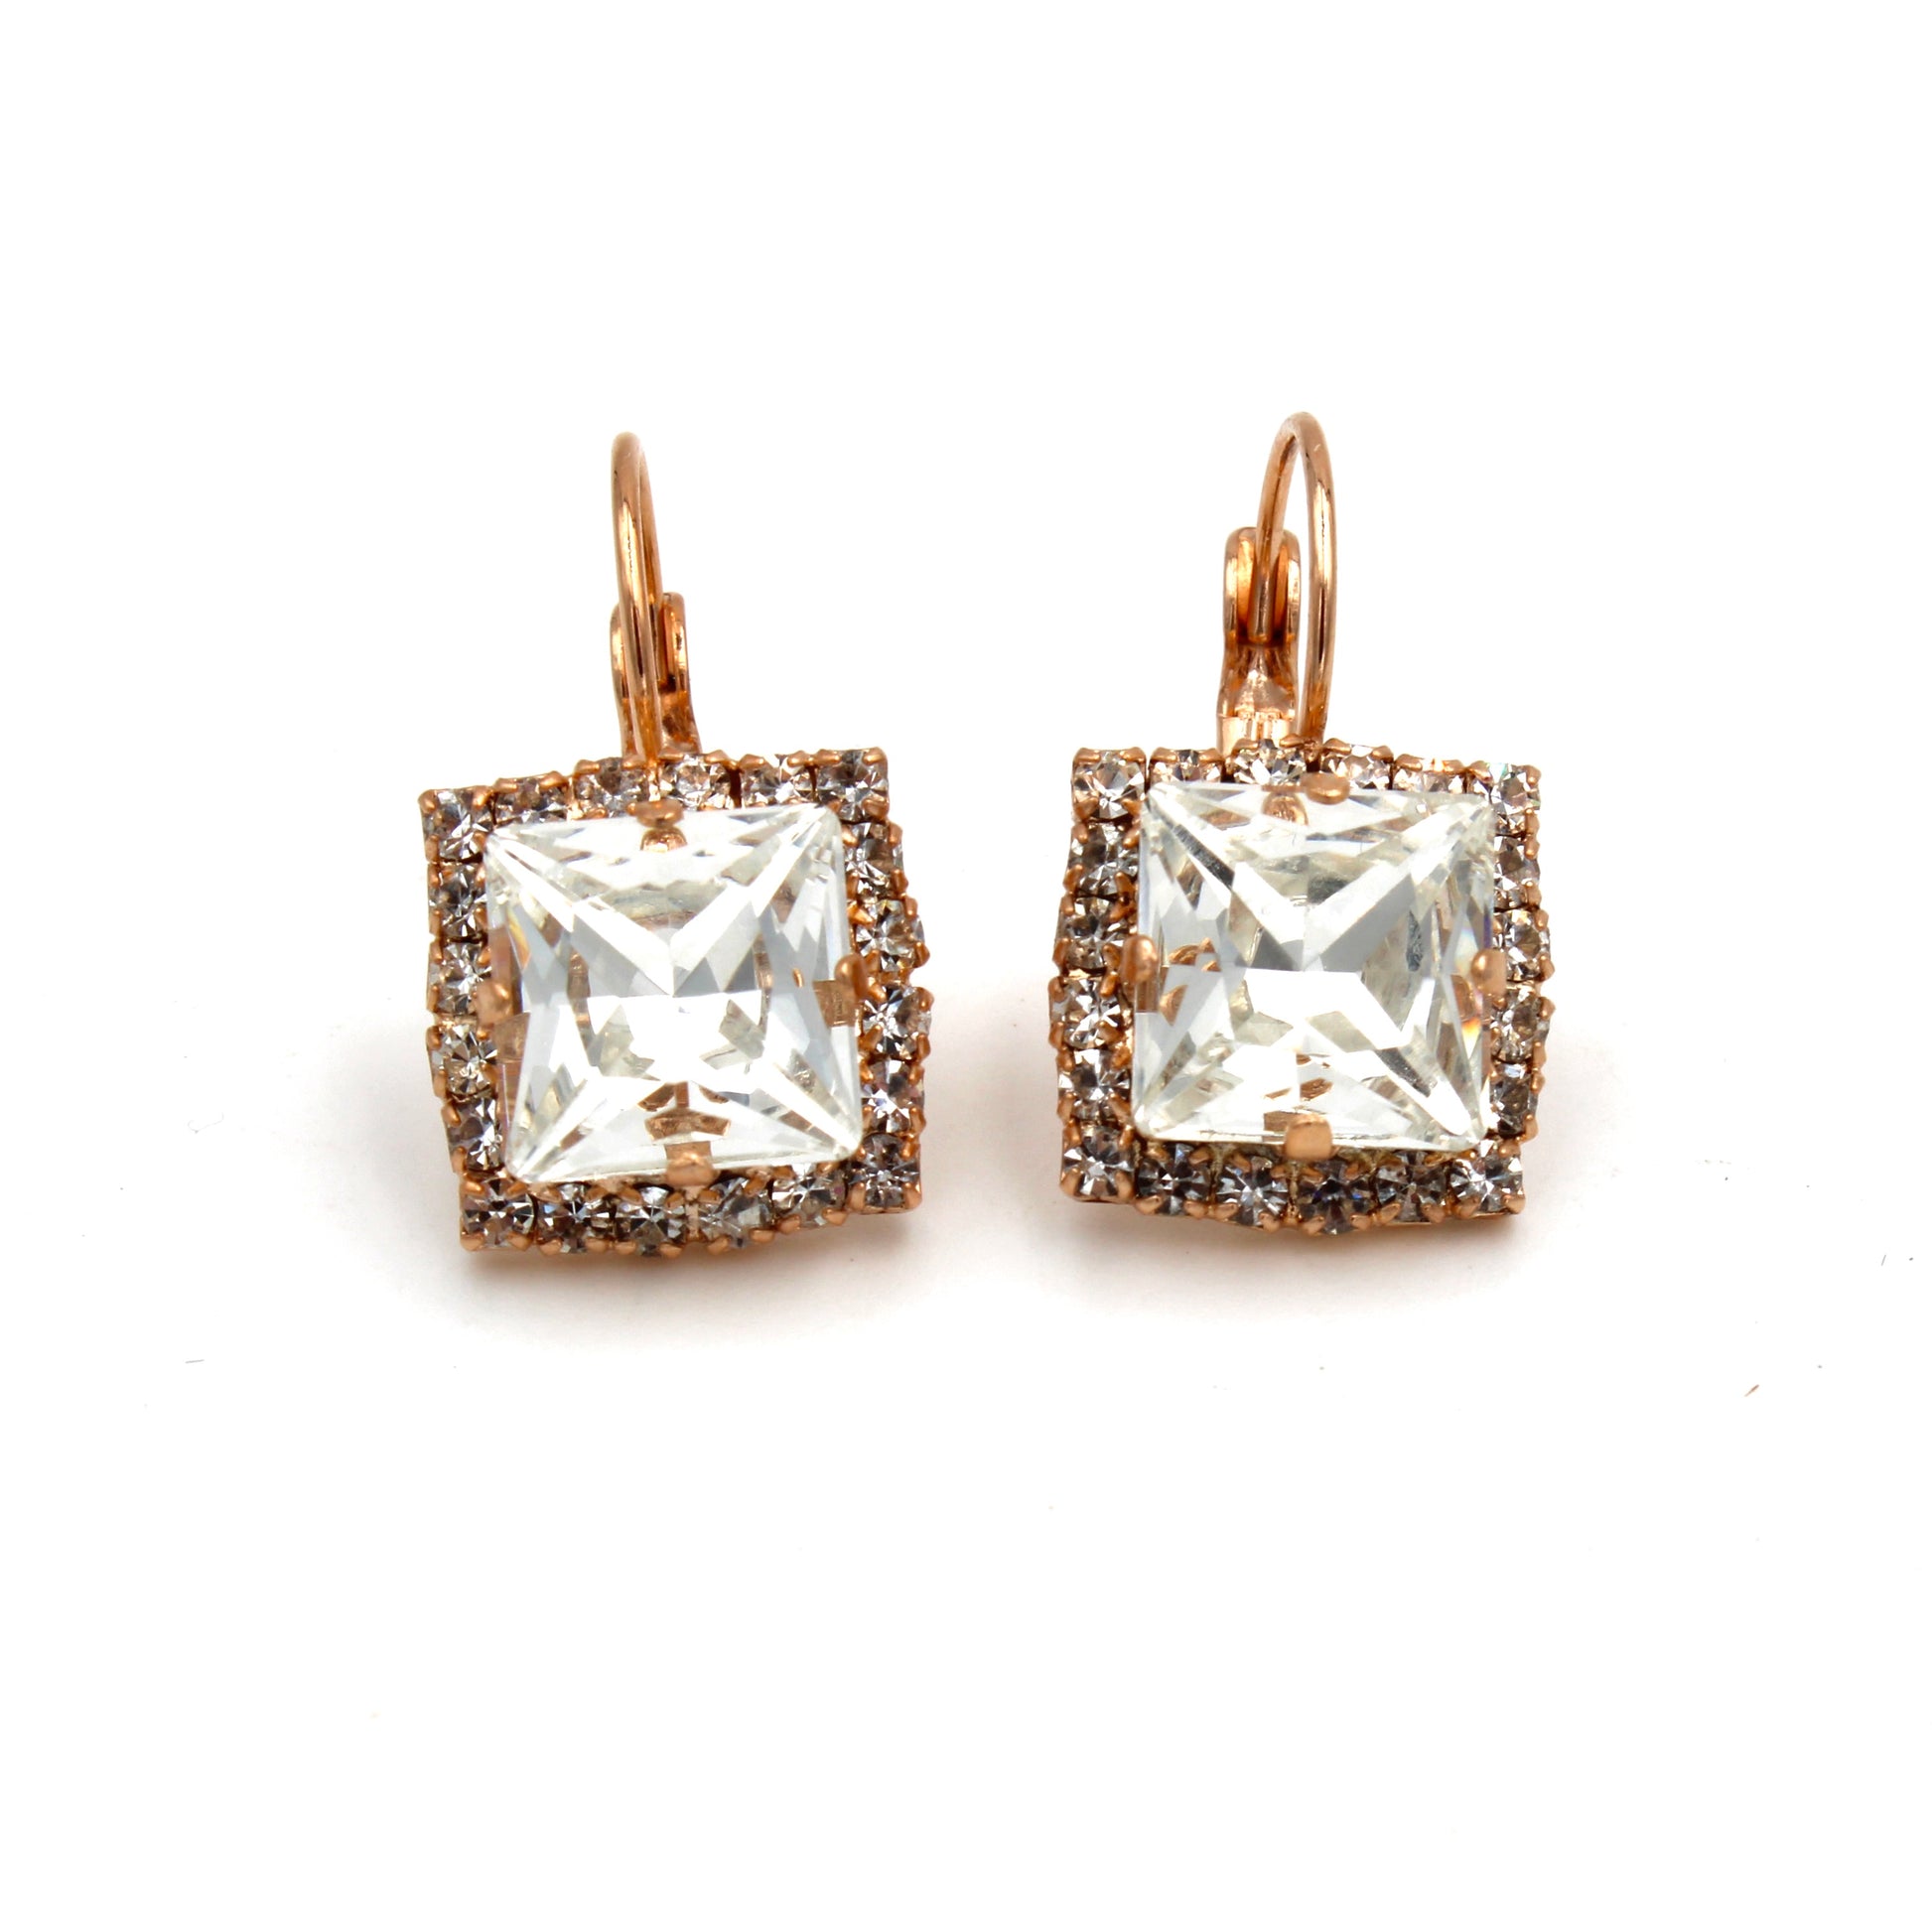 Magic Rock Square Crystal Earrings by LaHola in Rose Gold - MaryTyke's